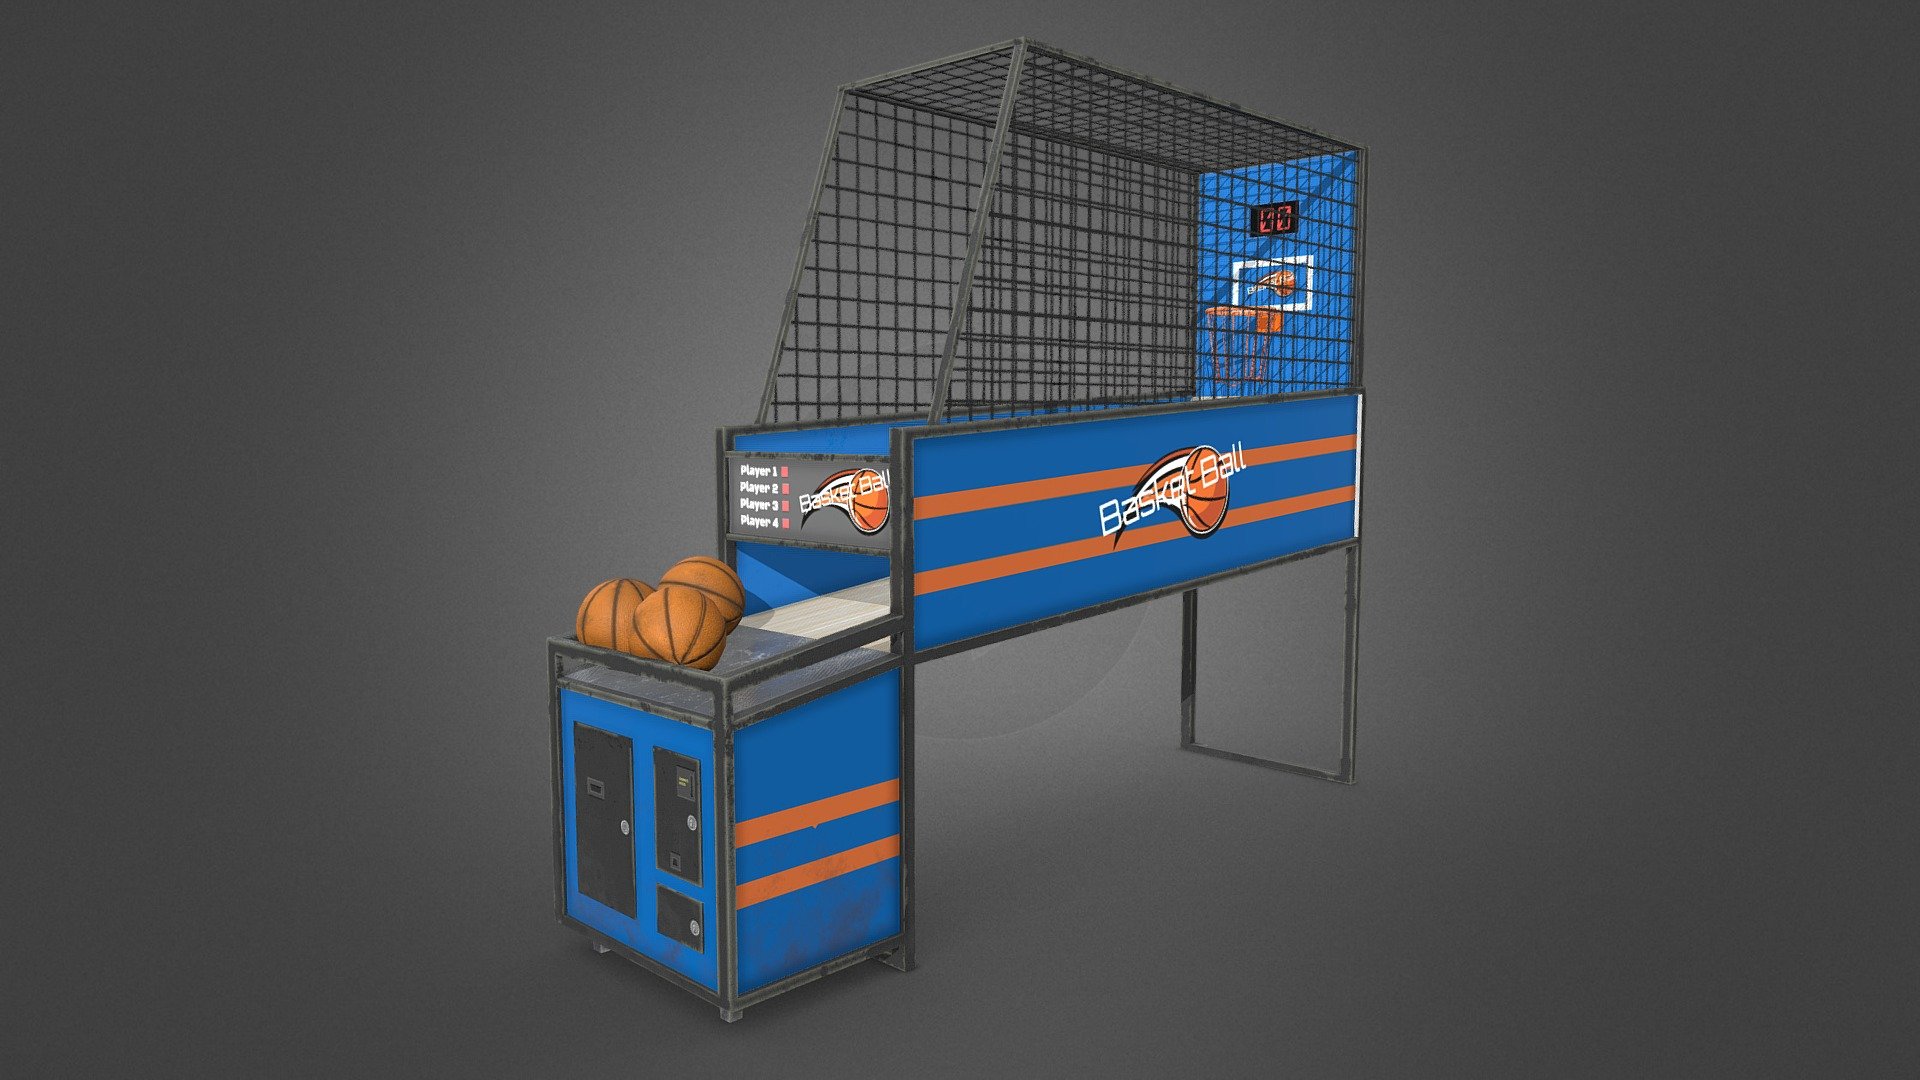 Realistic Game-Ready Hoops Basketball Arcade Machine / Mini Basketball.


Suitable for Real-Time renders and Game Engines, Ready to use in your scene and render.

Full Texture set (Basecolor, Roughness, Metallic, Ambient occlusion, Height, emissive, opacity and Normal Map) all at 4096x4096 Resolution.

The Machine and the ball are separated objects so you can duplicate the number of balls and change its position.

Polycount : Arcade BasketBall Machine : 752 Faces - Ball : 256 Faces.

The net is created using opacity mask to save polycount for better performance.


Overview:

Full PBR Texture Maps (Basecolor, Roughness, Metallic, Ambient occlusion, Height, emissive, opacity and Normal Map).

All textures come in PNG Format with 4096x4096 resolution

No Plugins Required.

All objects and textures are well organized and named.

Fully unwrapped UVs, Non-overlapping UV-islands. Efficient use of the UV space.

Real Life Dimensions.

Total PolyCount is 752 Faces.
 - Hoops Basketball Arcade Machine - PBR GameReady - Buy Royalty Free 3D model by Abdelrahman Ahmed (@AbdelrahmanAhmed) 3d model